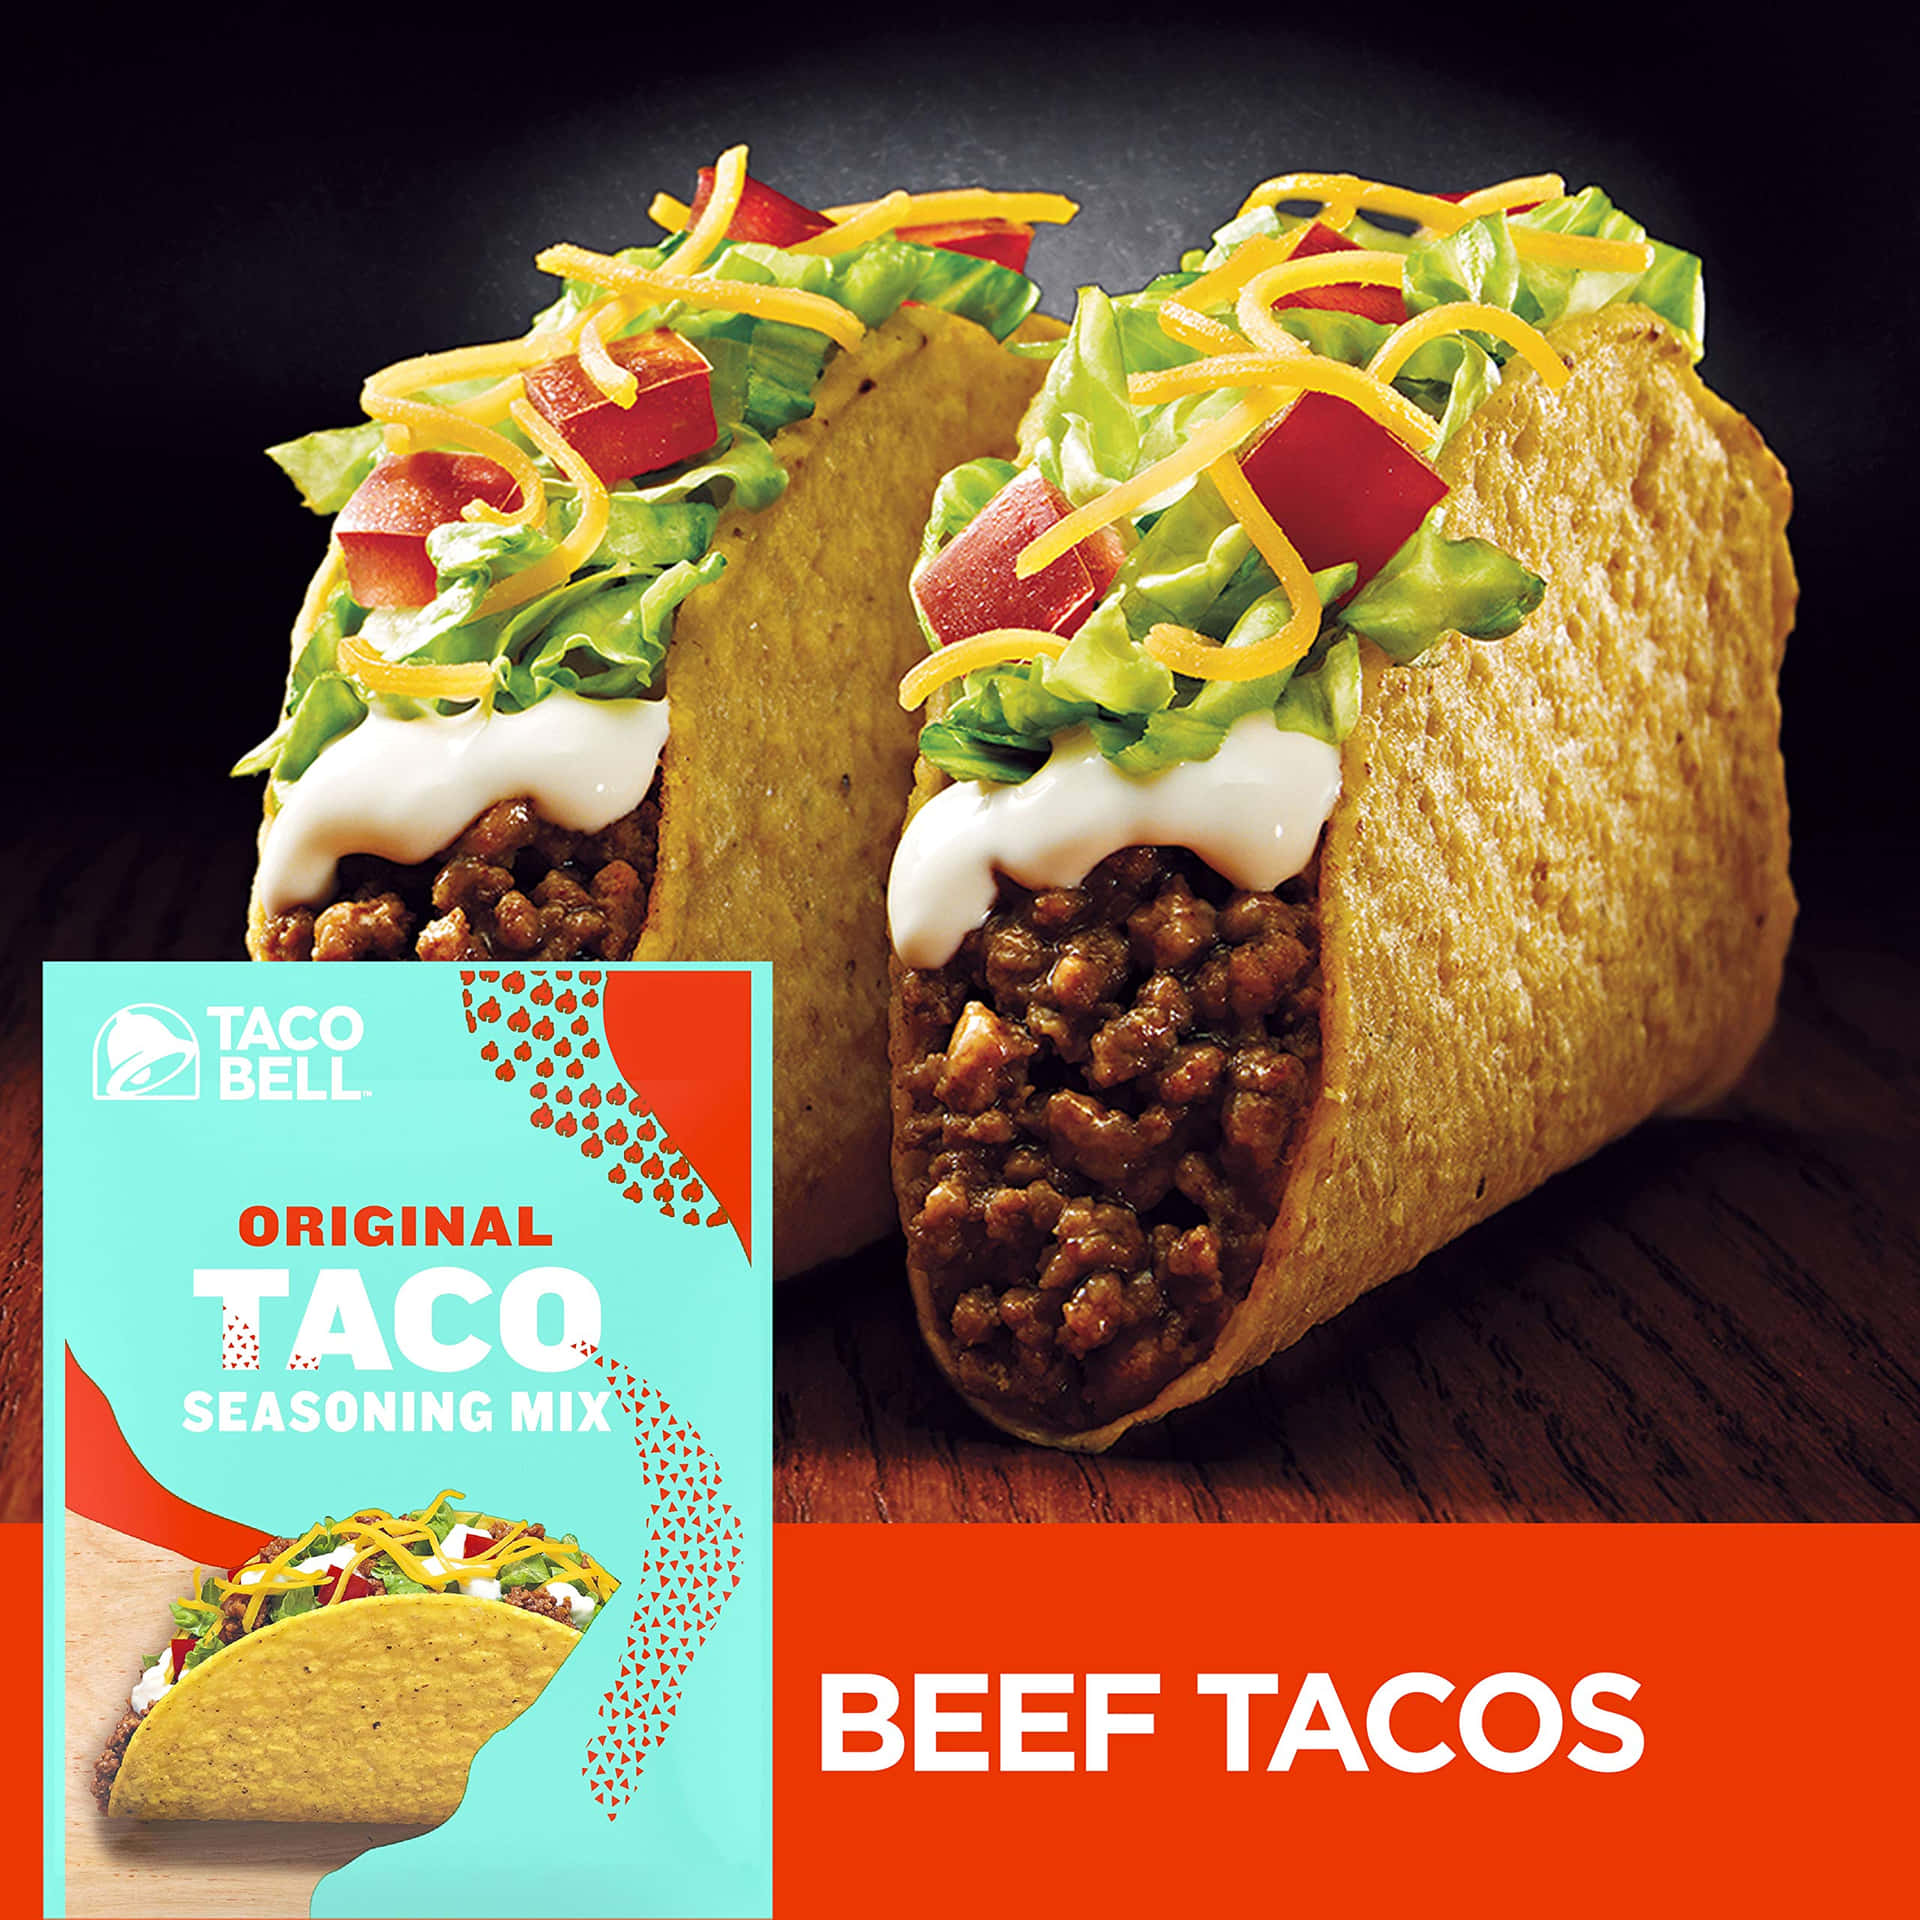 Enjoy the delicious flavors of Taco Bell